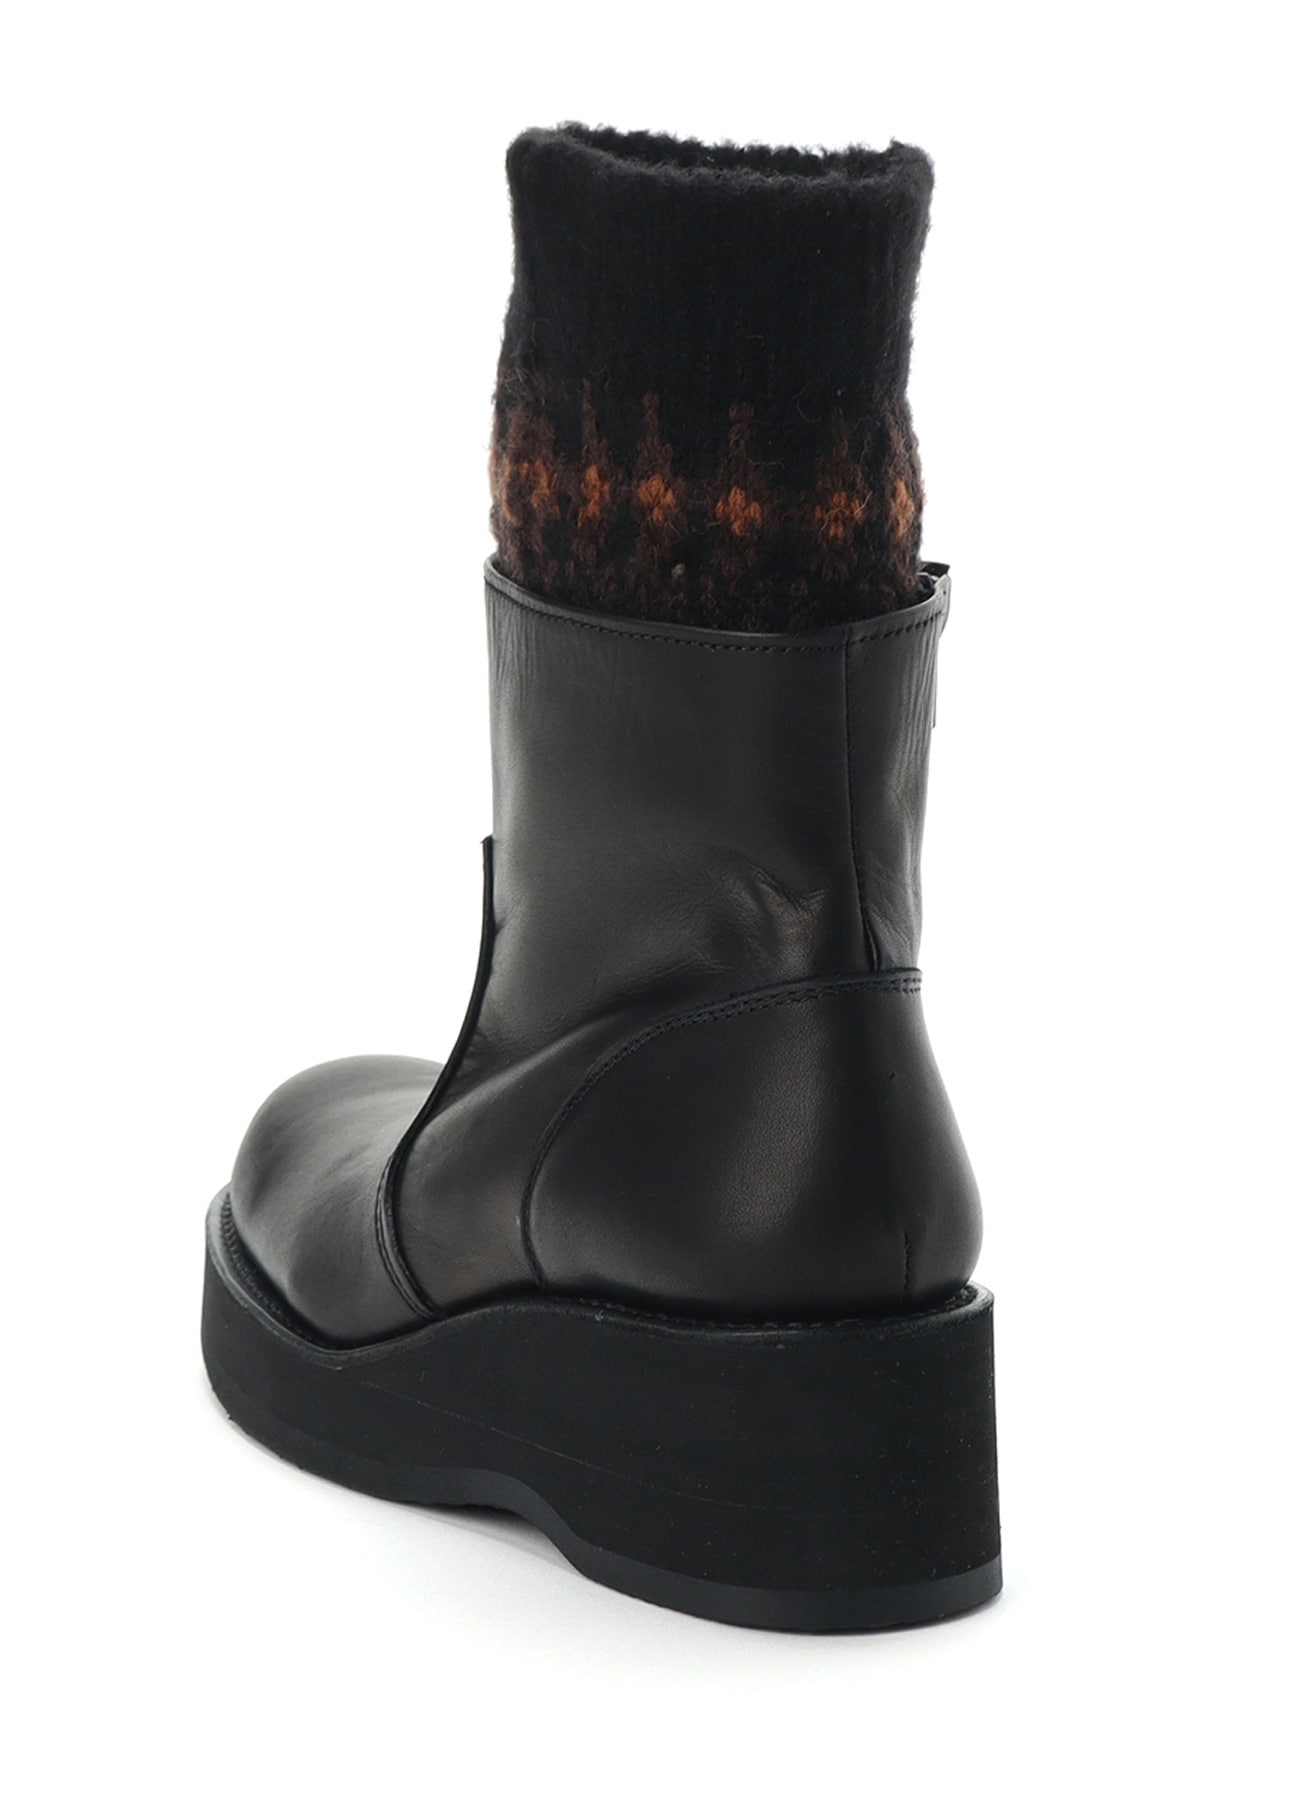 JACQUARD KNIT LEATHER COMBI NORDIC KNITTED BOOTS